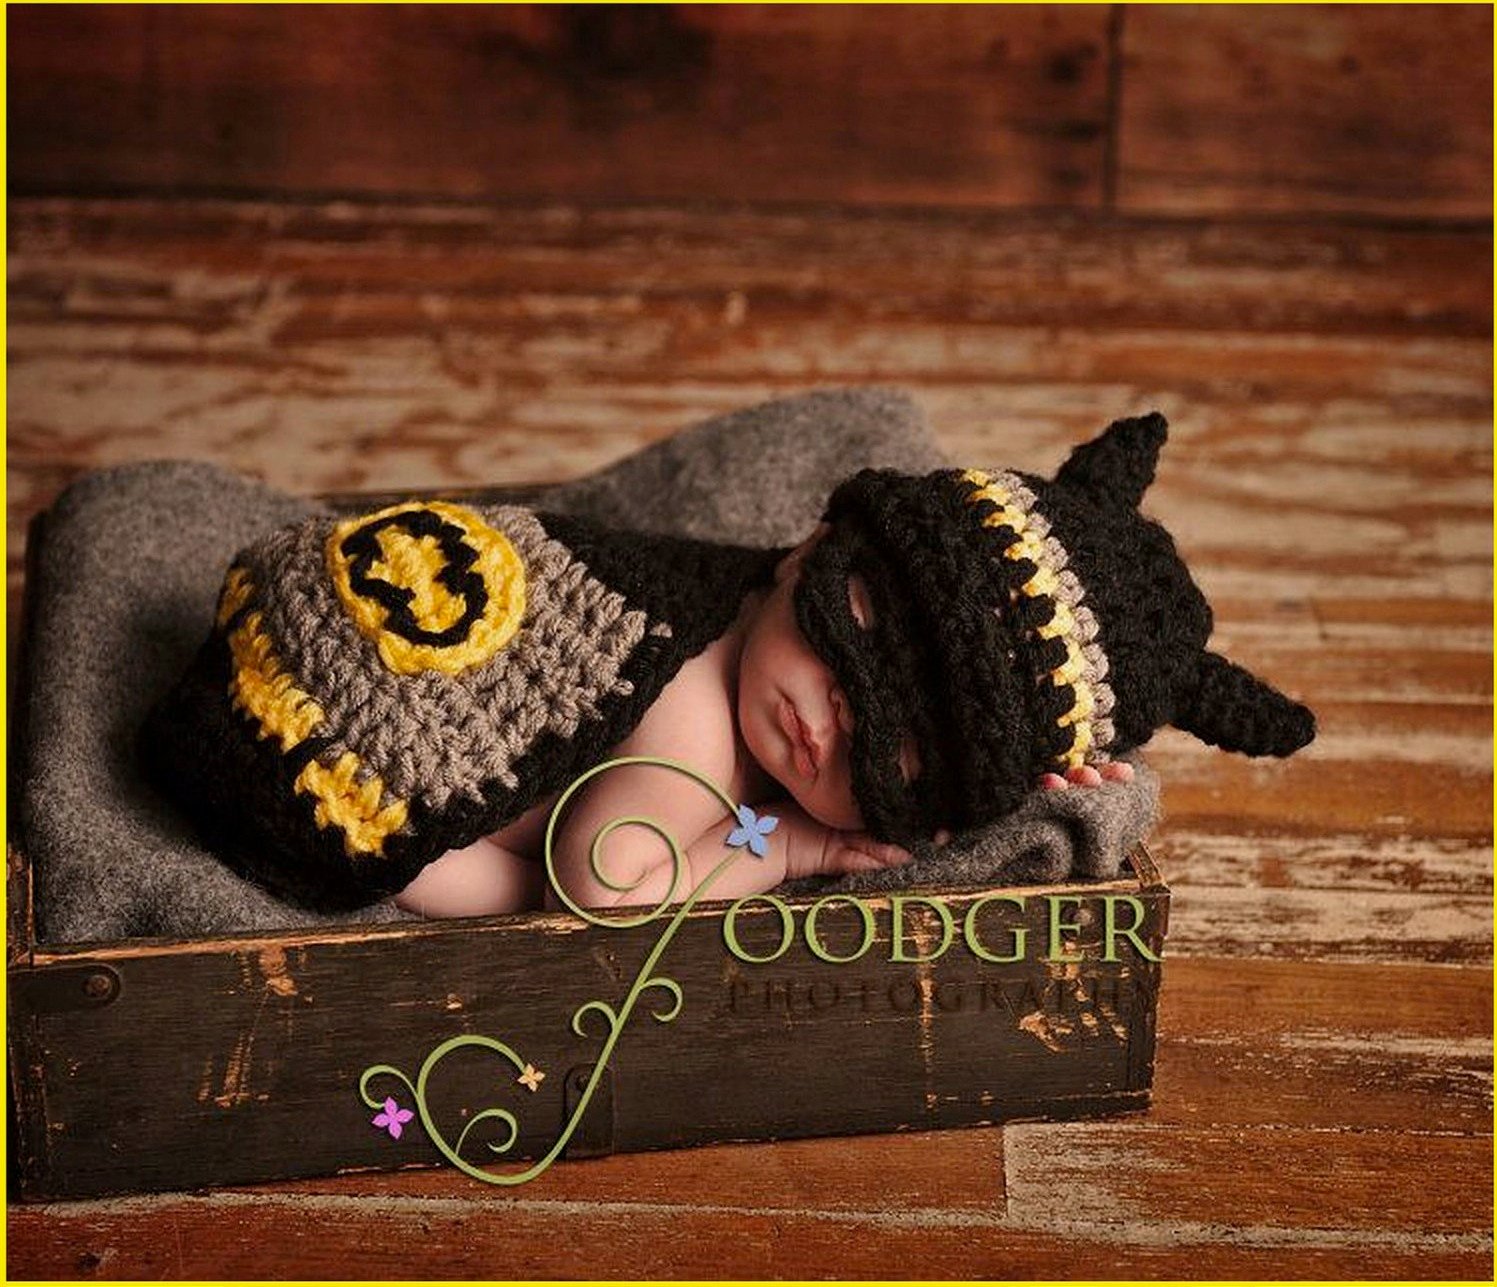 baby batman outfit